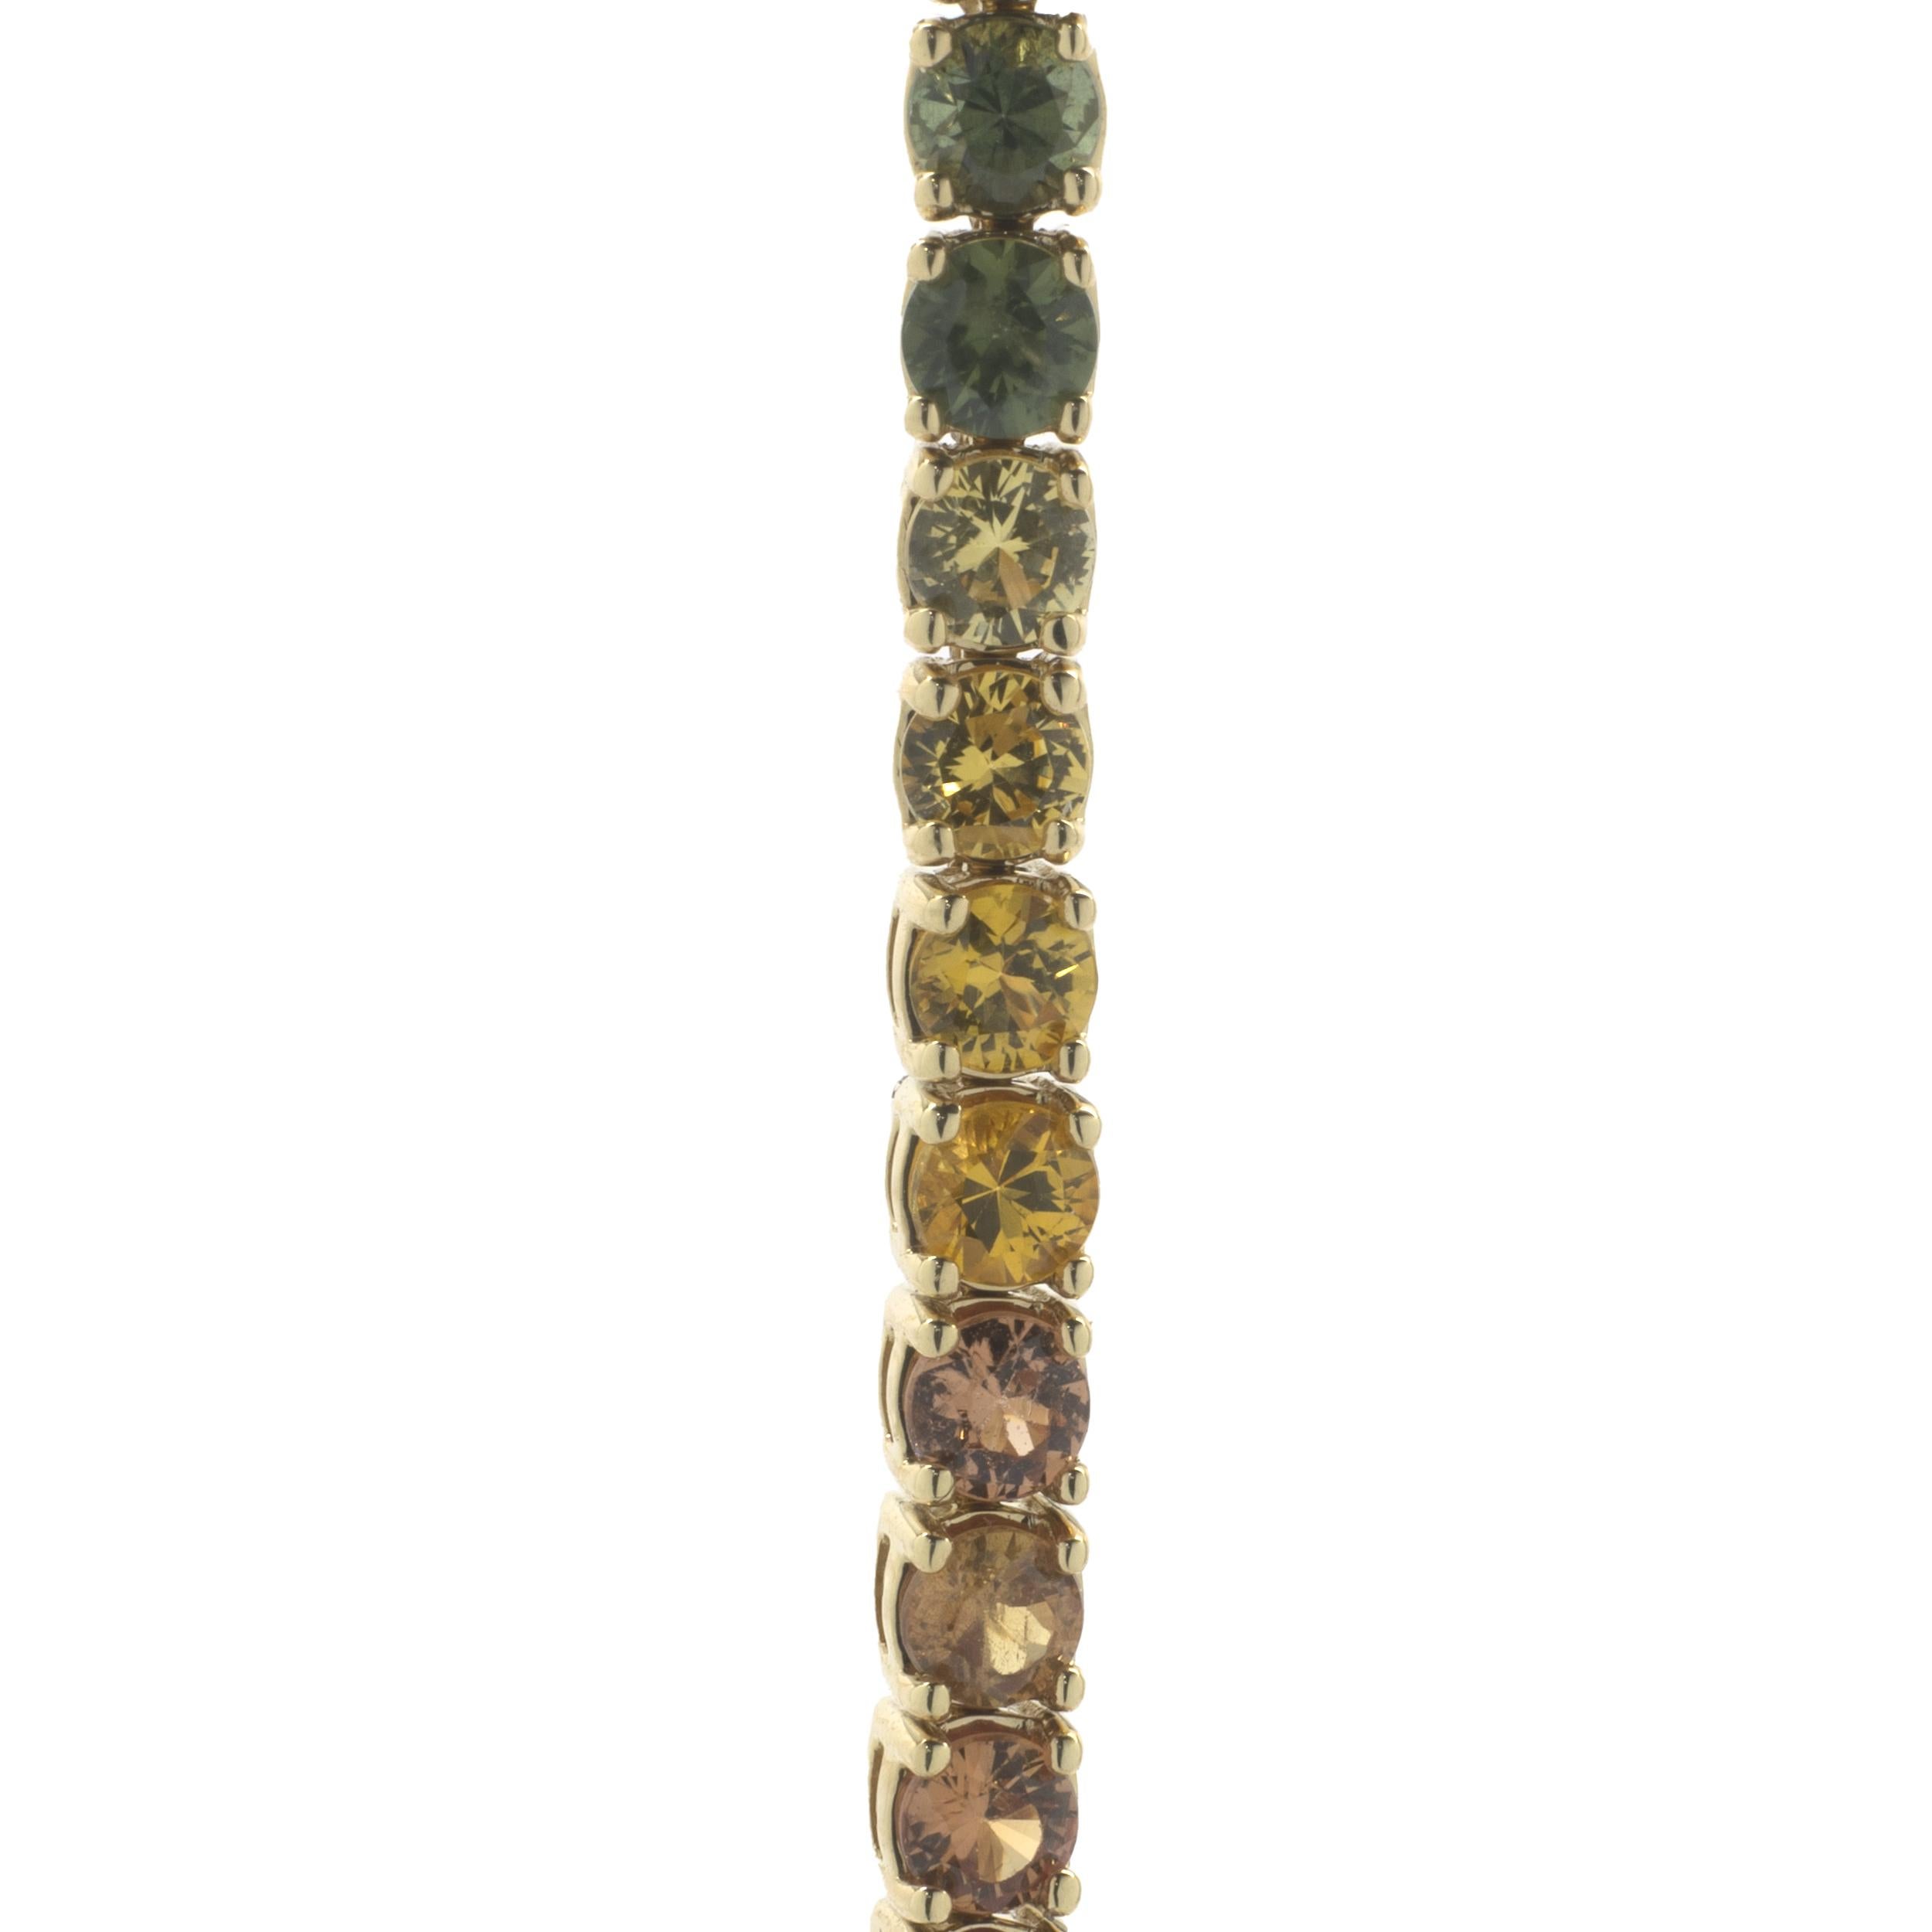 Designer: custom 
Material: 18K yellow gold
Sapphire: 59 round cut = 5.78cttw
Dimensions: bracelet will fit up to a 7-inch wrist
Weight: 13.26 grams
